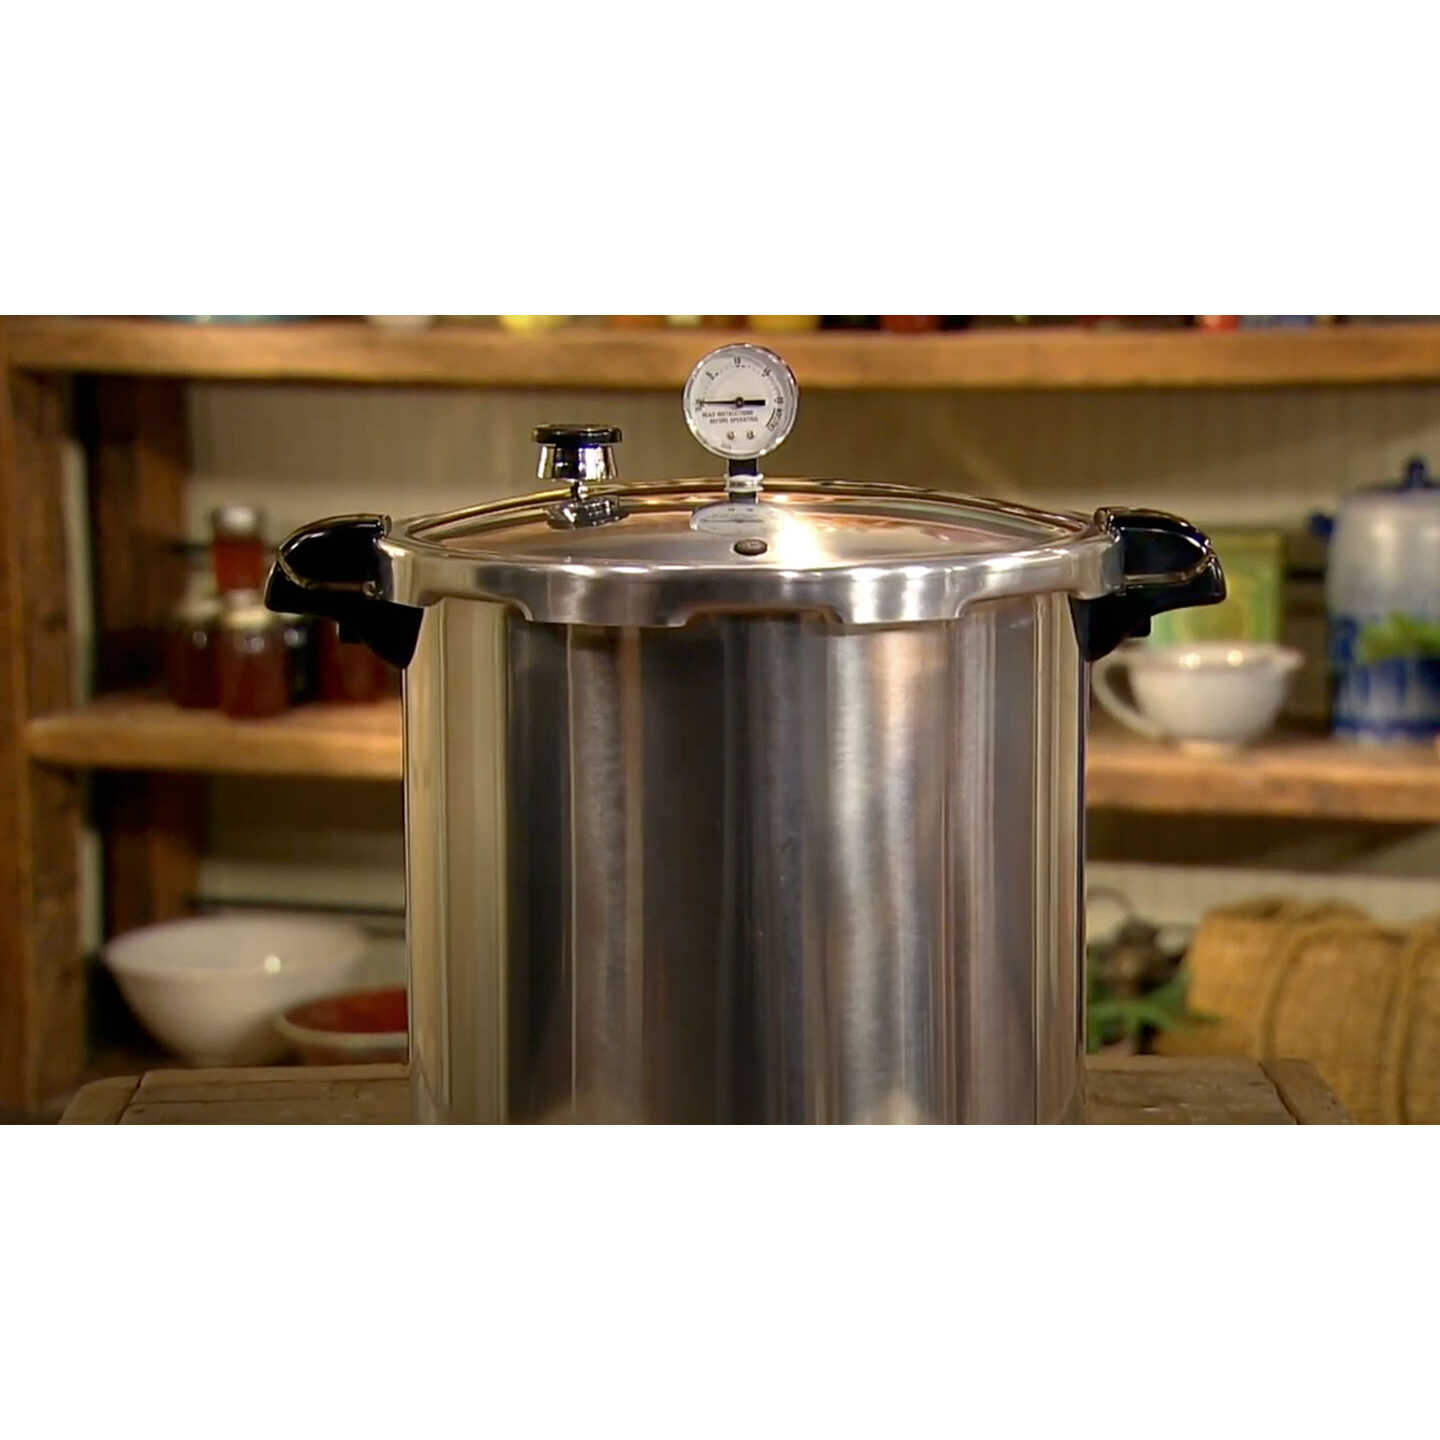 All High Quality Pressure Canner for Home Canning 21.5 Quart